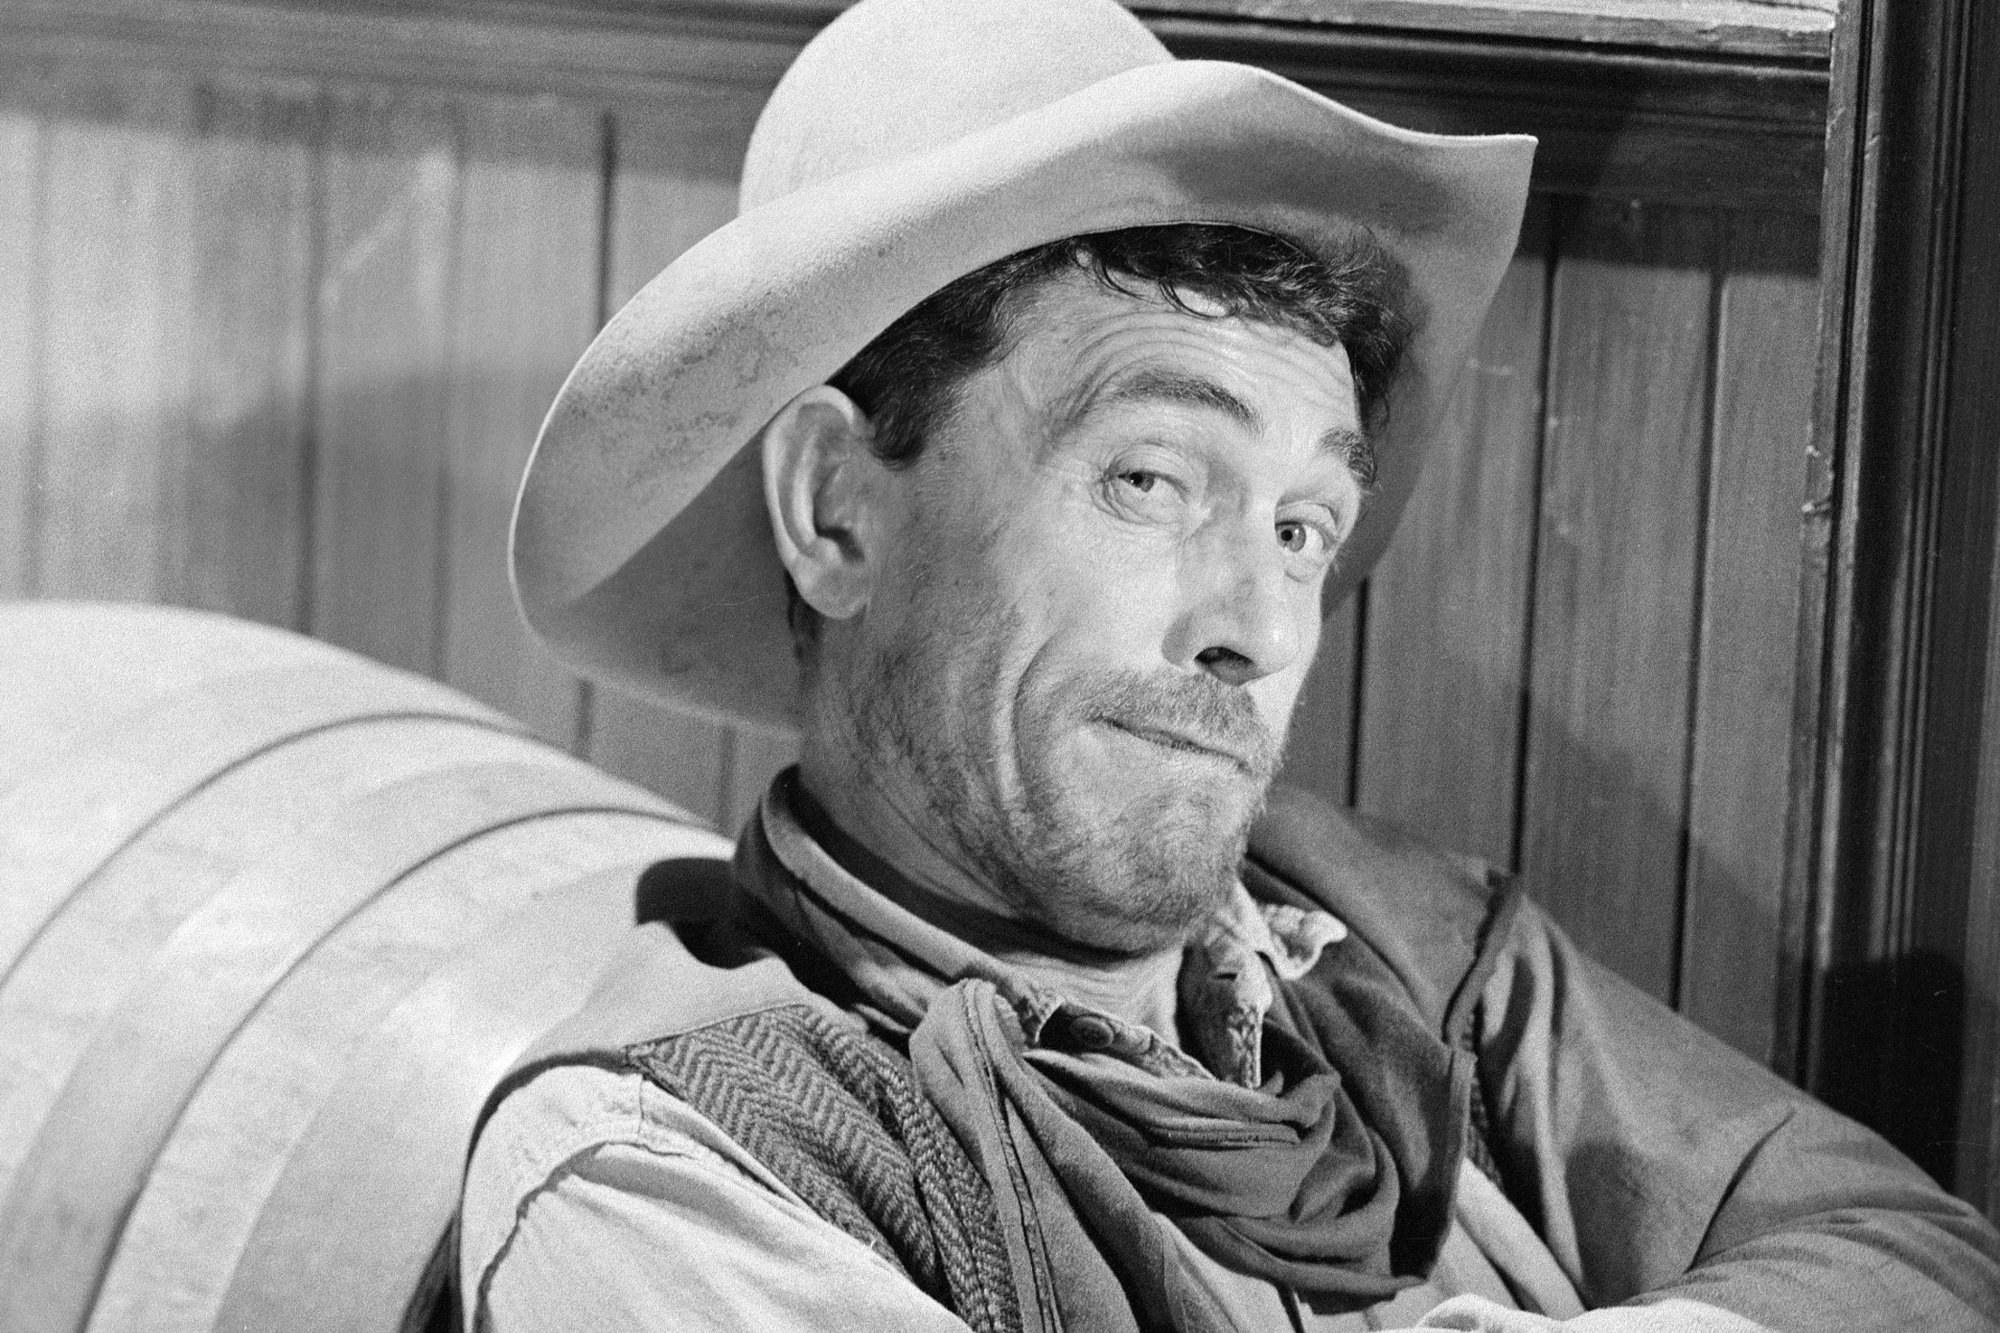 'Gunsmoke' Ken Curtis as Festus Haggen with a smirk on his face in a black-and-white picture. He's wearing a cowboy hat and Western clothing.